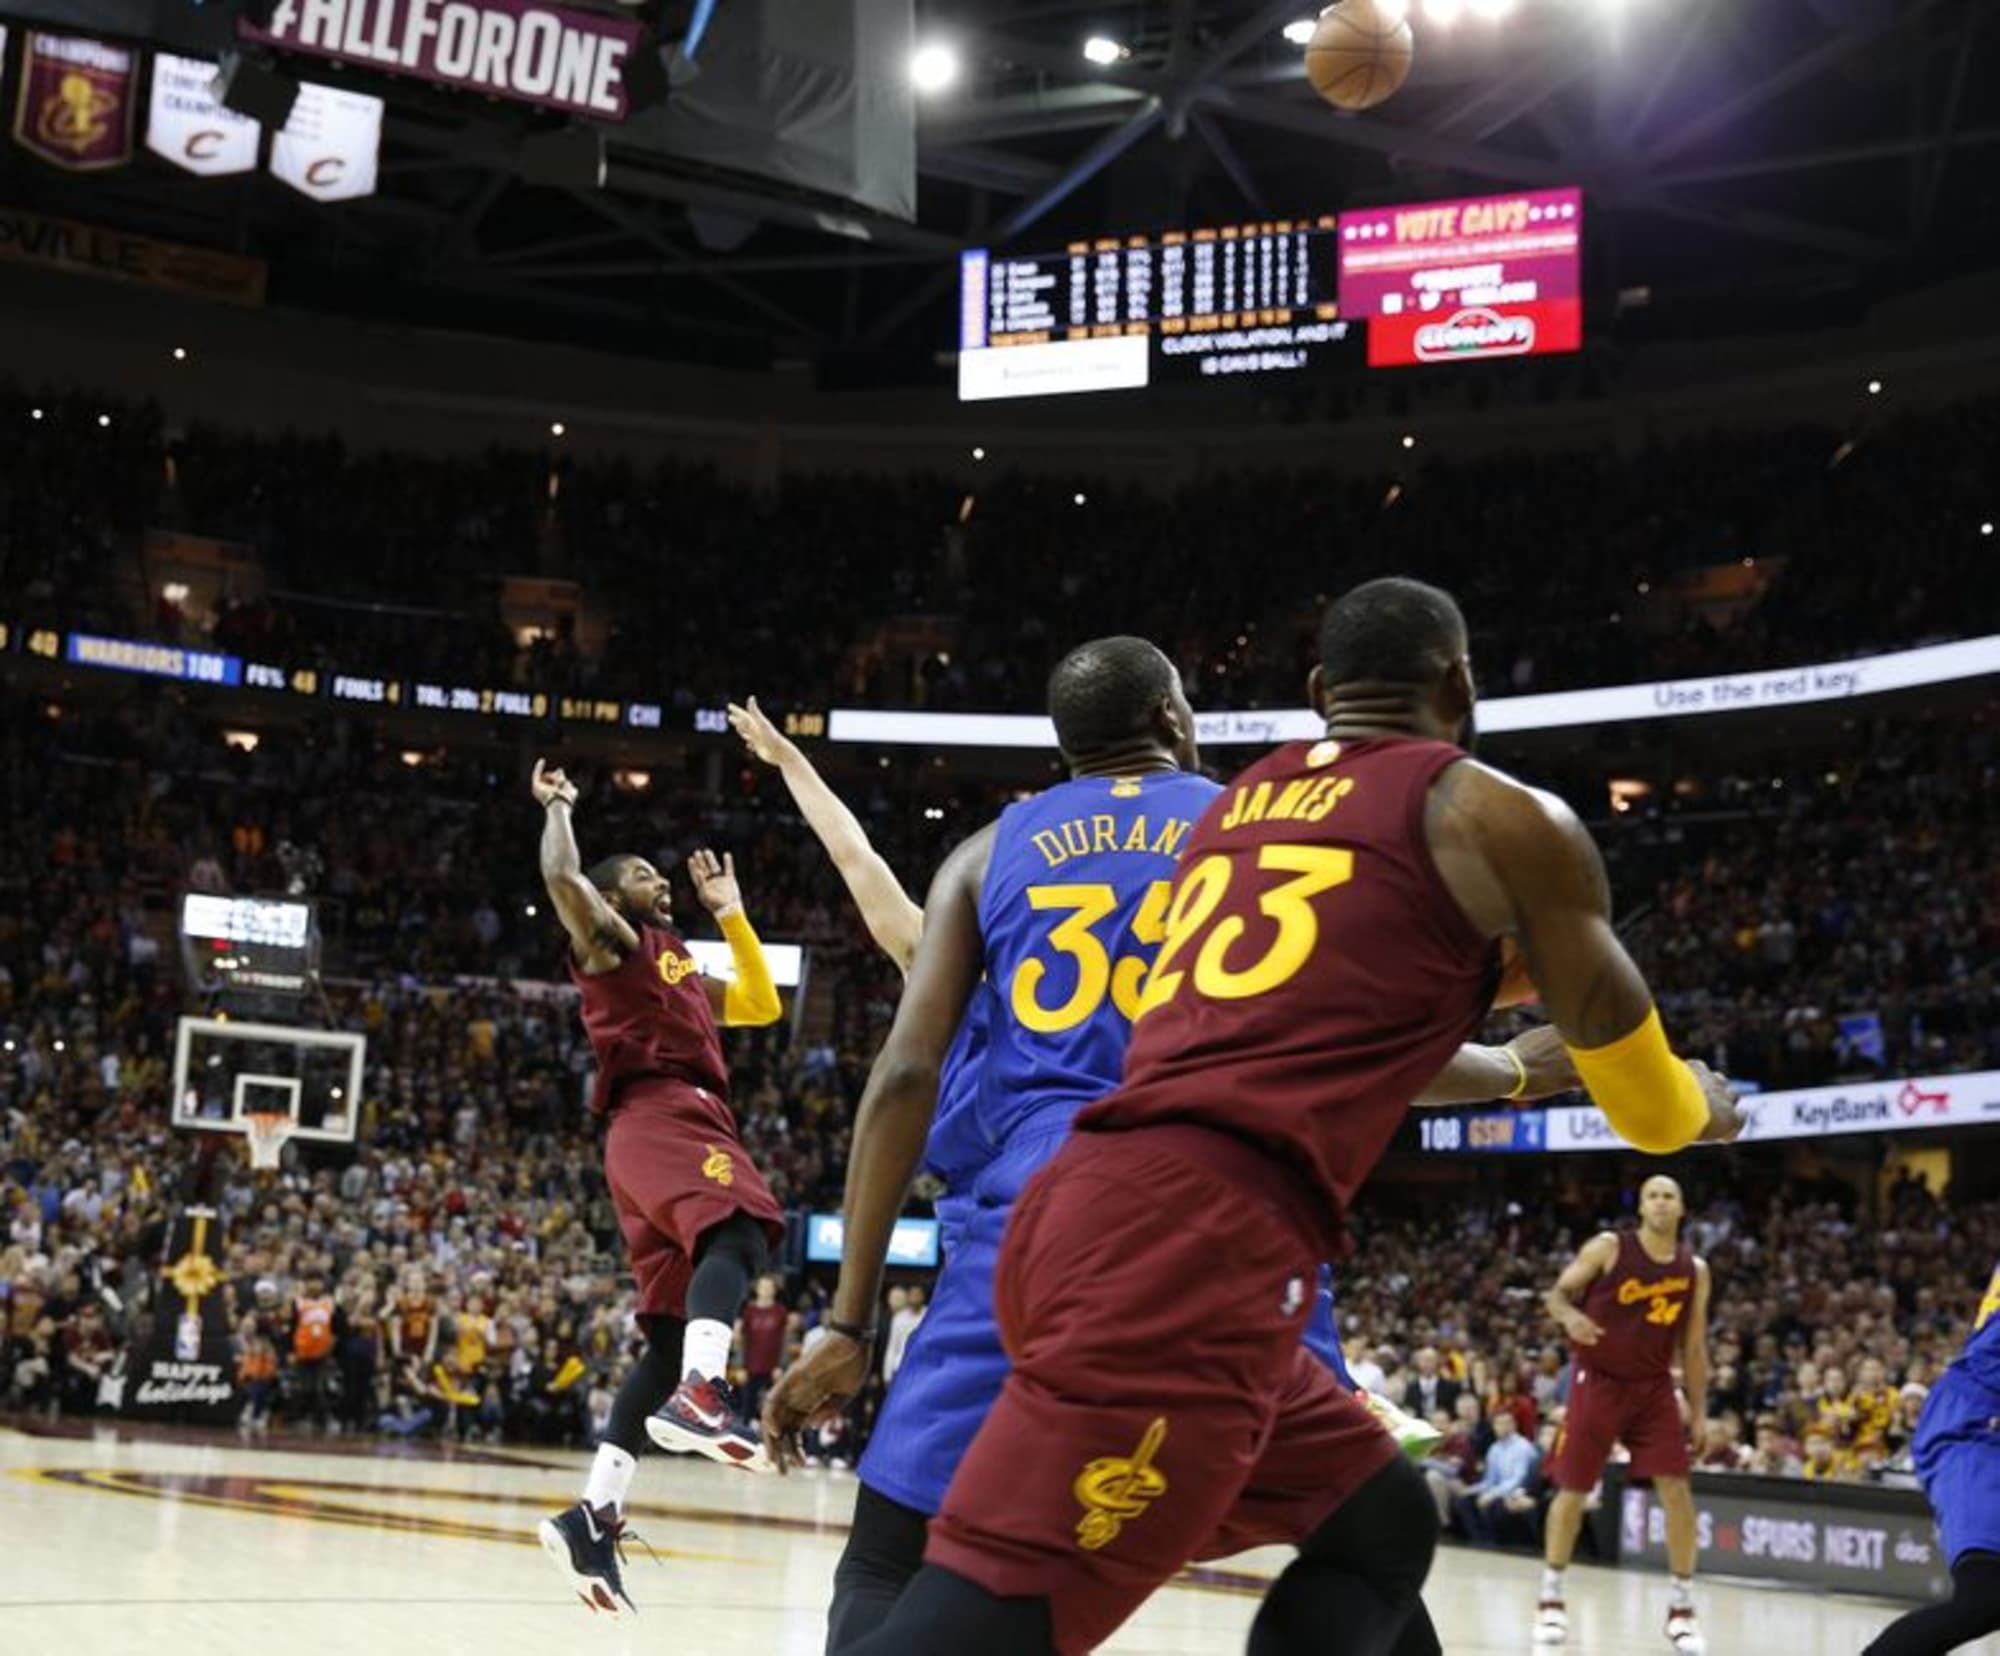 Kyrie Irving against the Warriors on a Christmas Day in the NBA